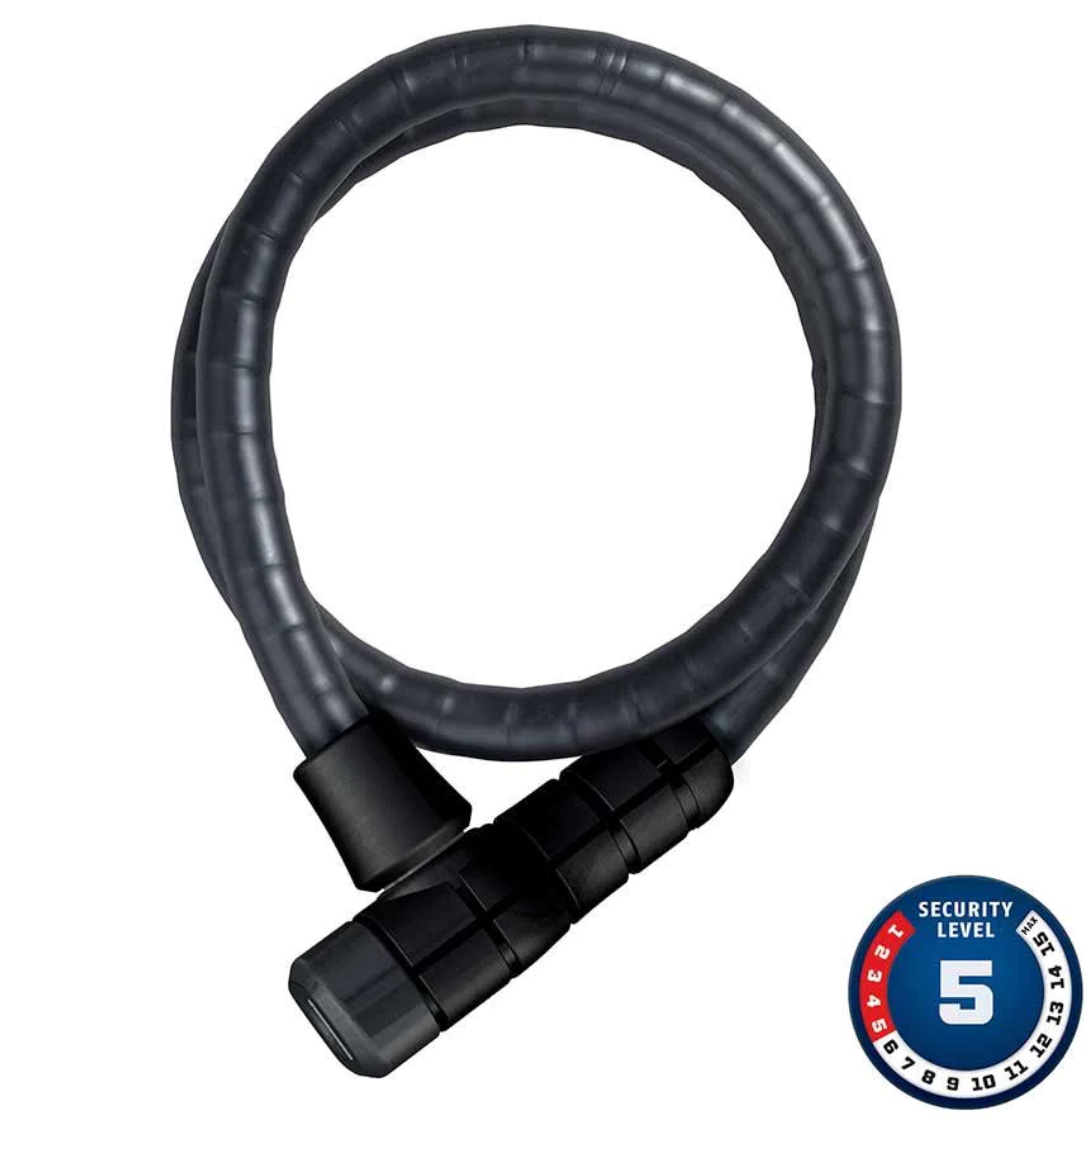 Abus, Microflex 6615K, Armored cable with key lock, 15mm x 85cm (15mm x 2.8')